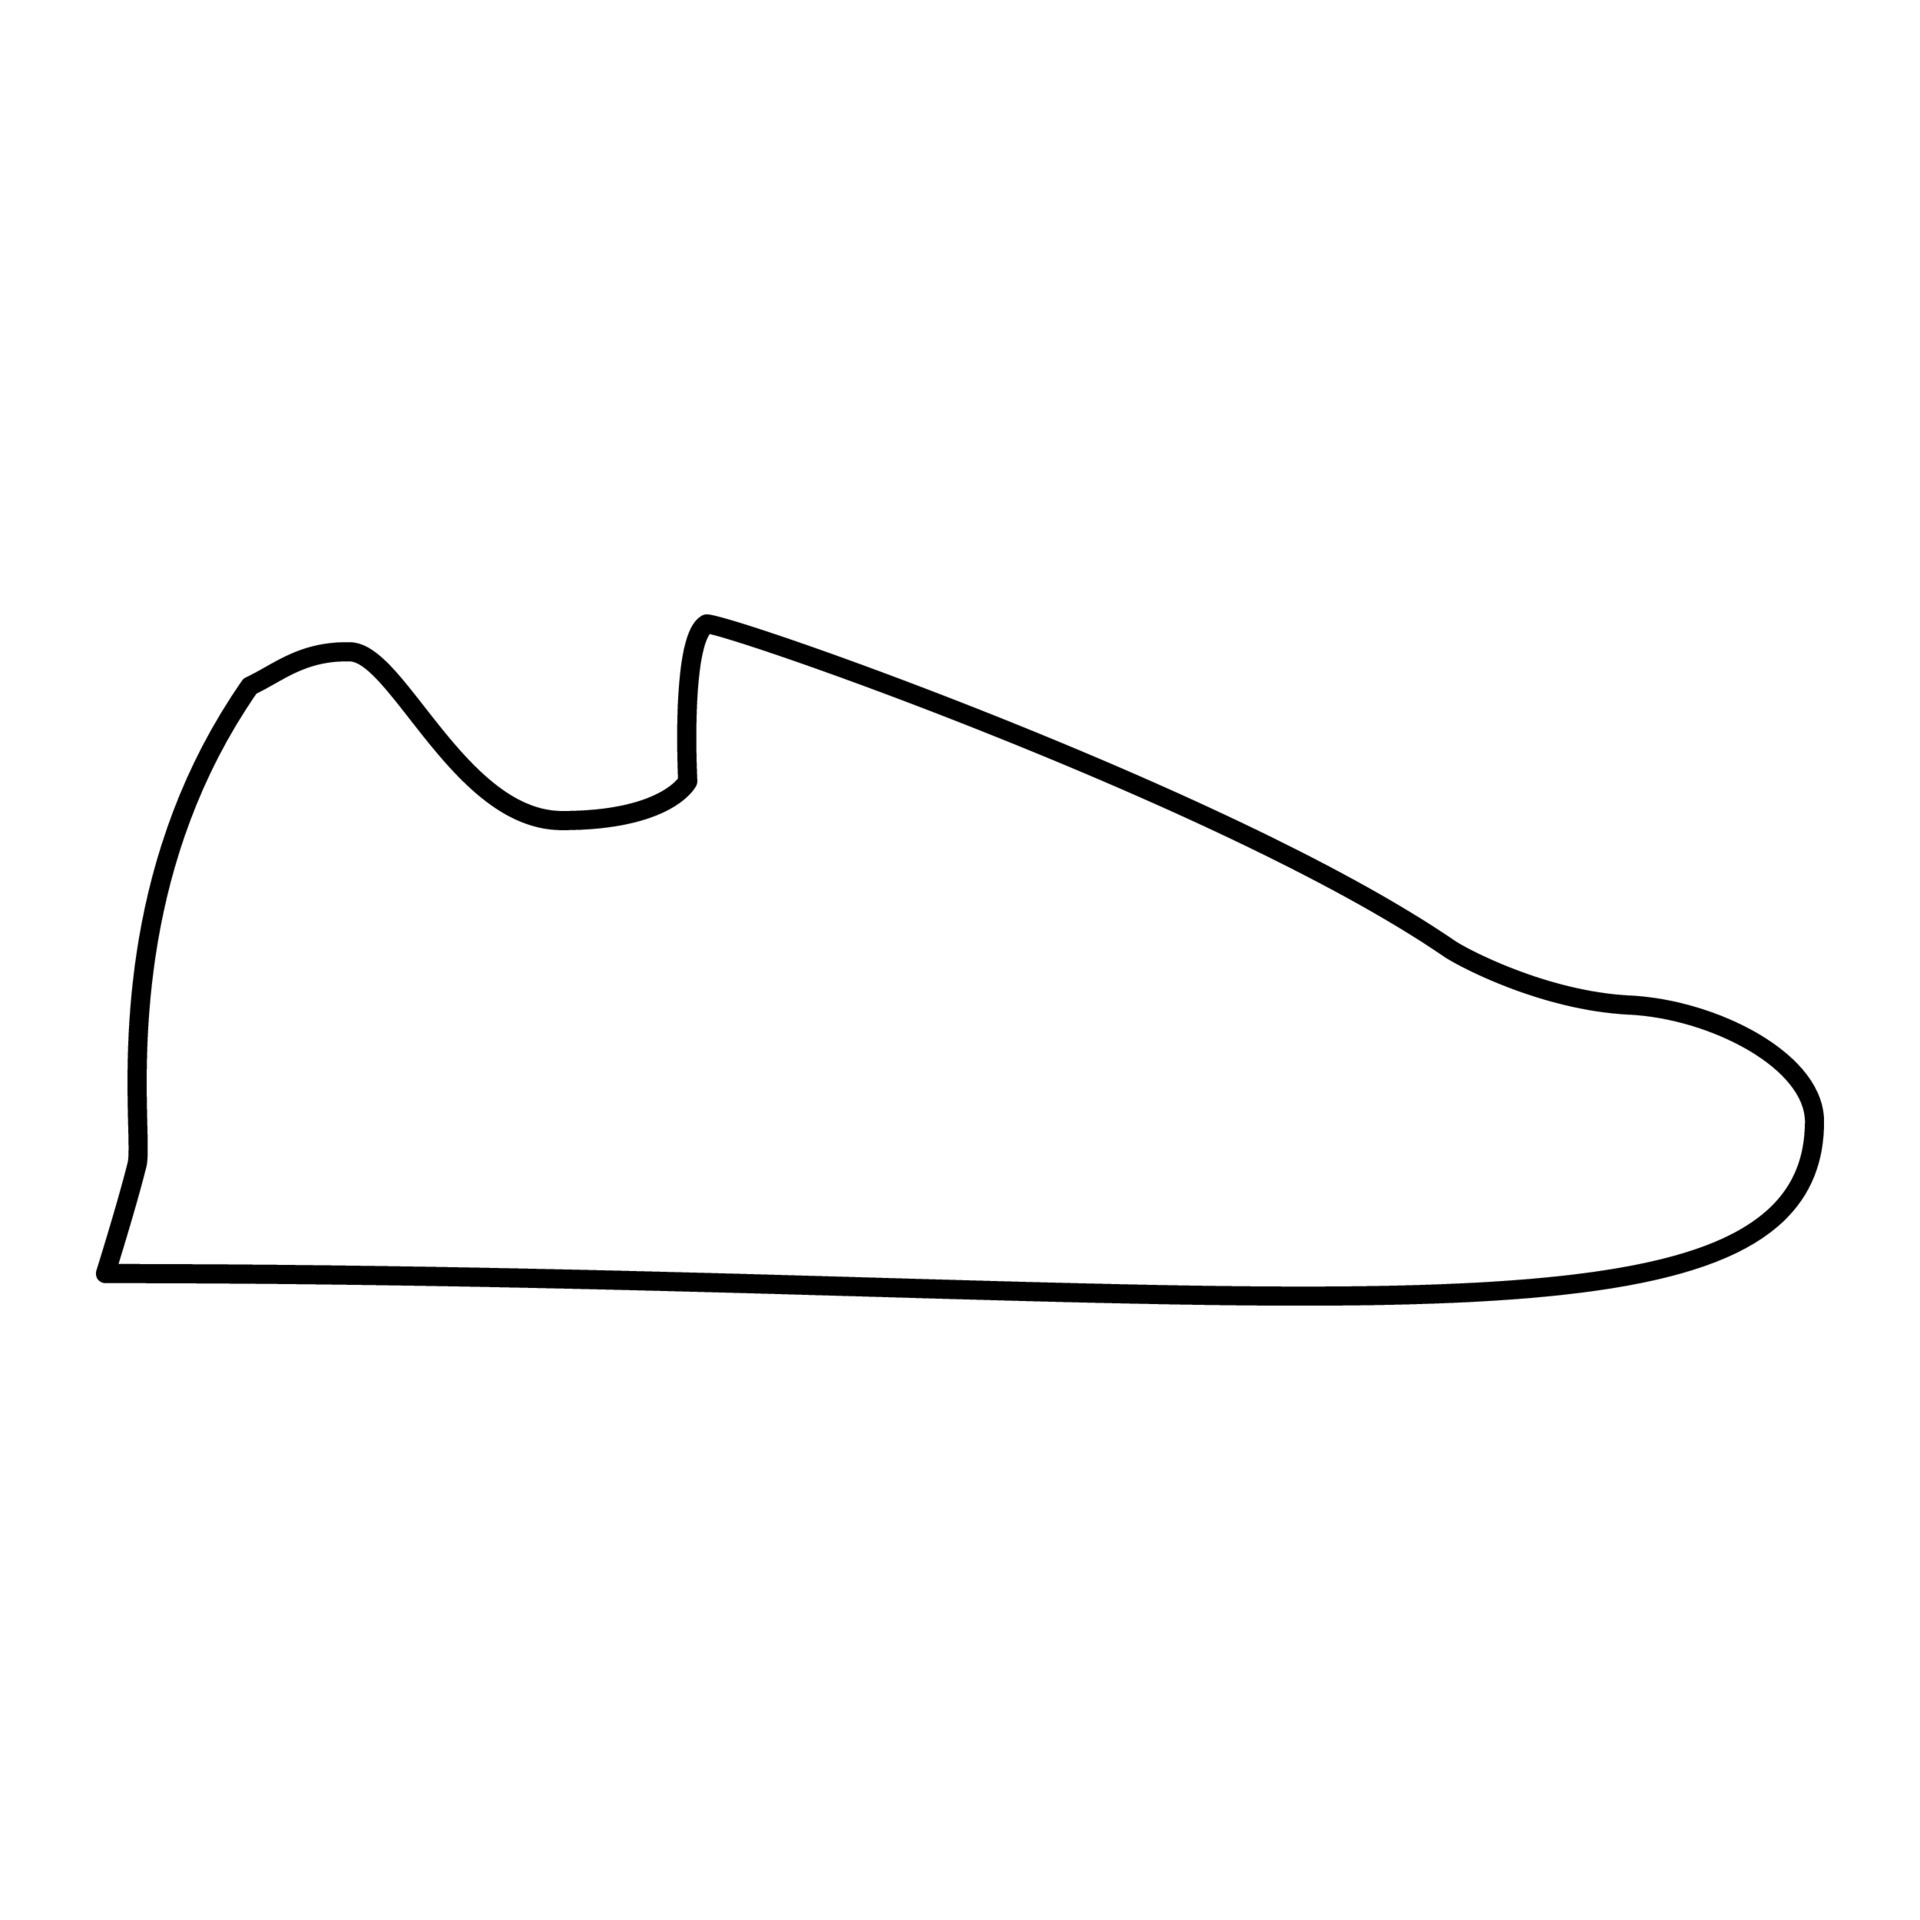 Running shoes Sneakers Sport shoes Run shoe icon 5158525 Vector Art at ...